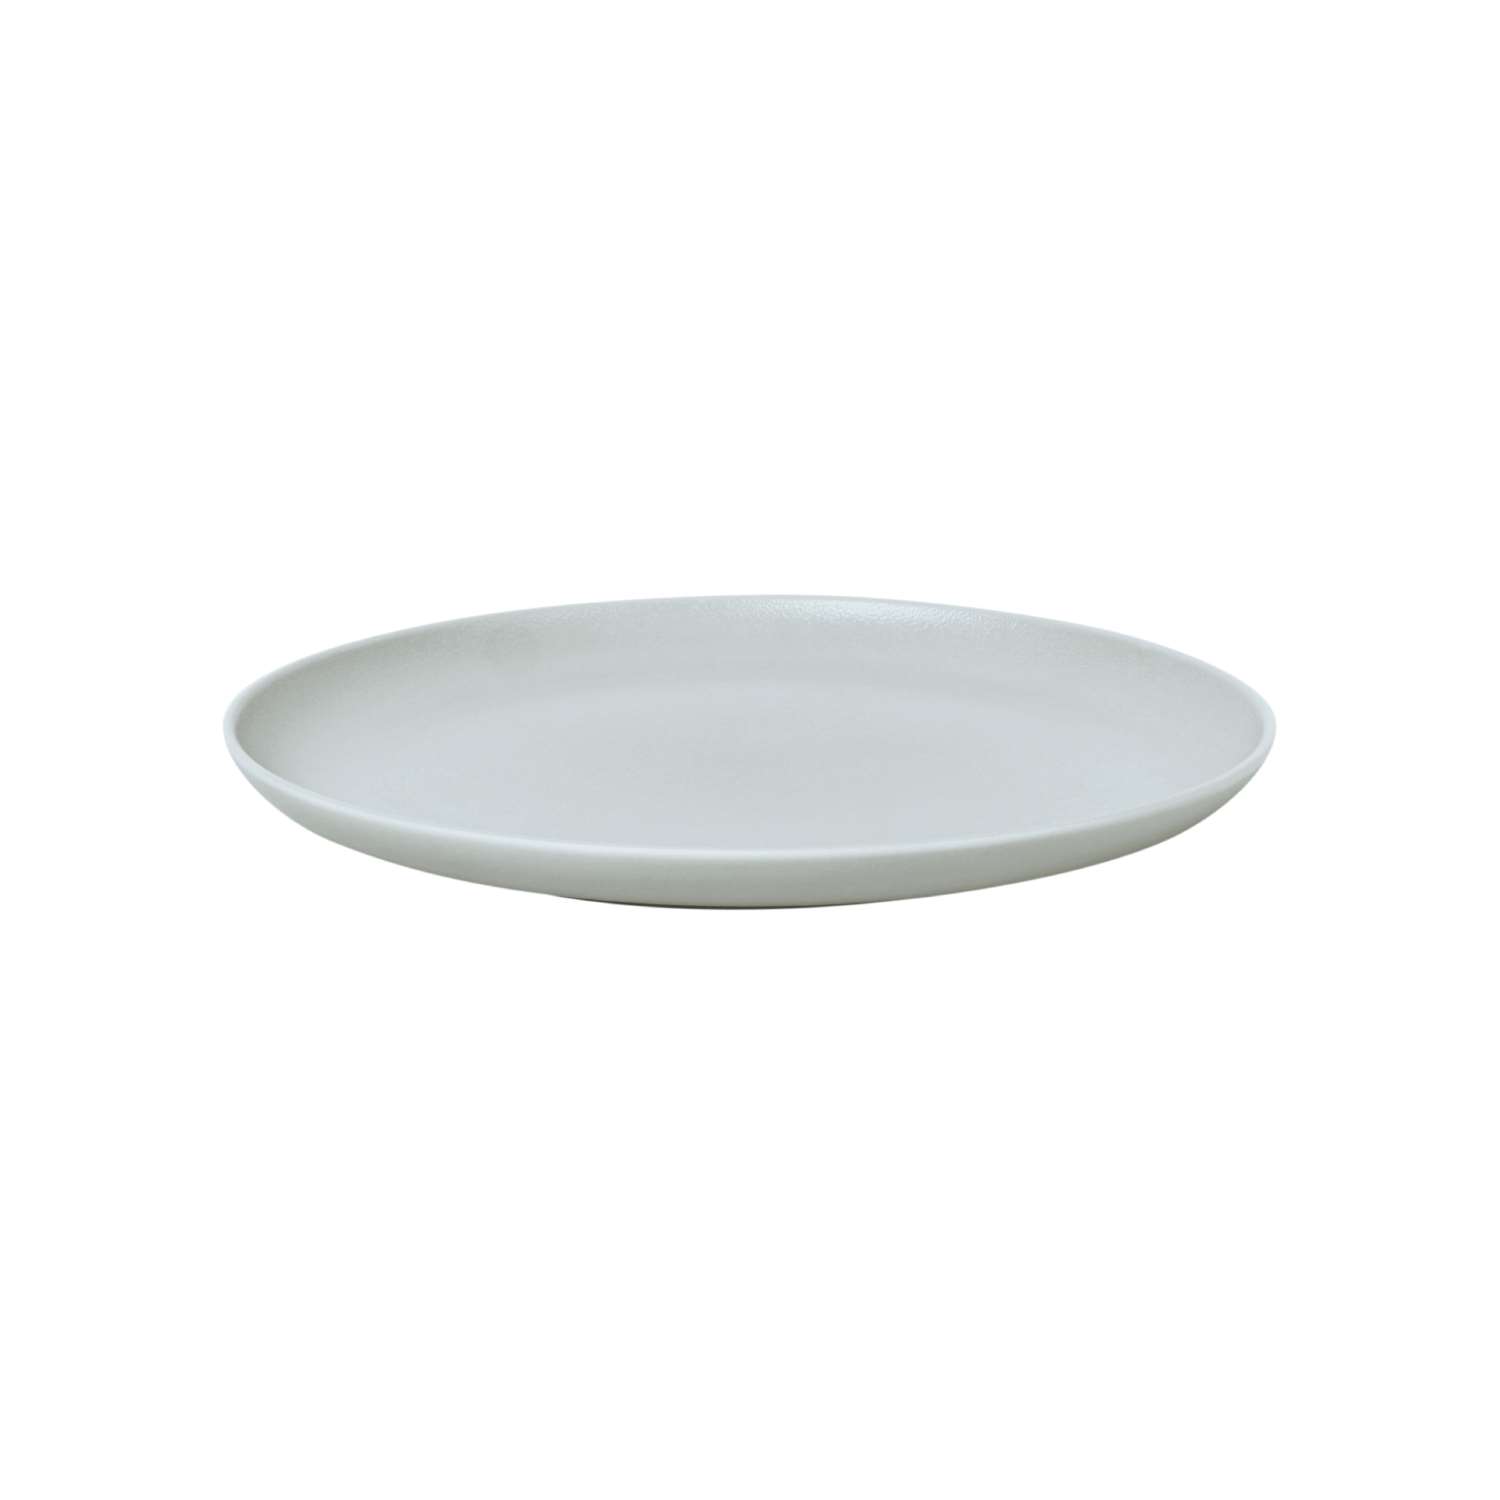 Baralee Light Grey Coupe Plate 16 Cm